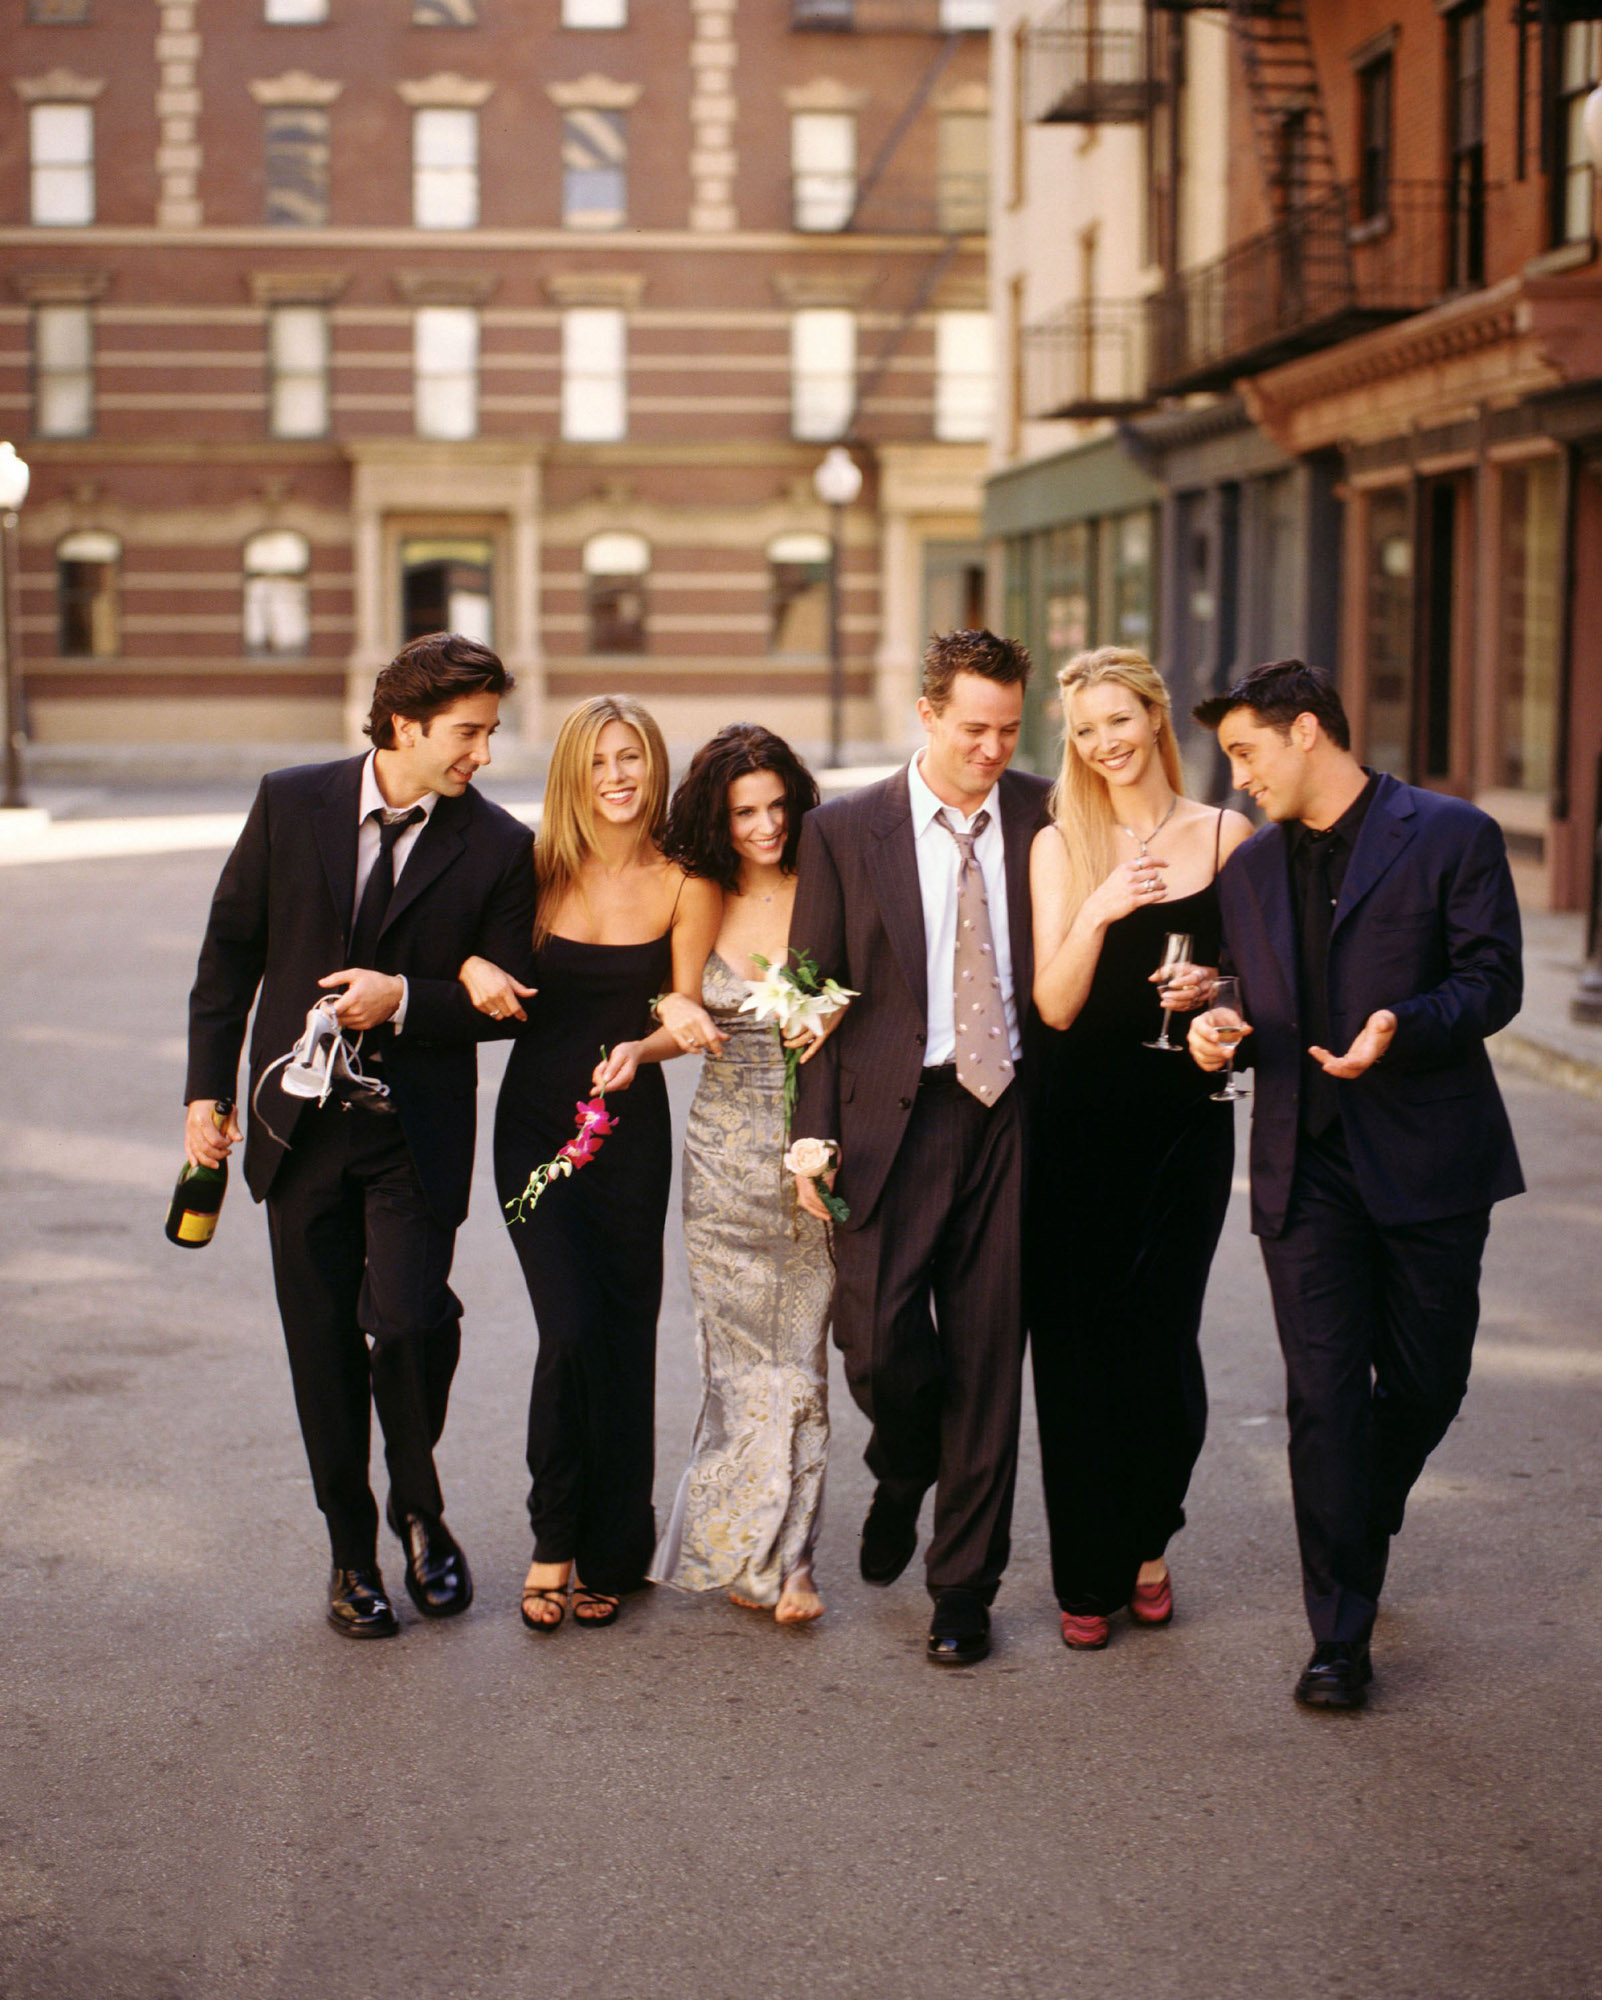 Image - Street-promo-front.jpg | Friends Central | FANDOM powered by ...